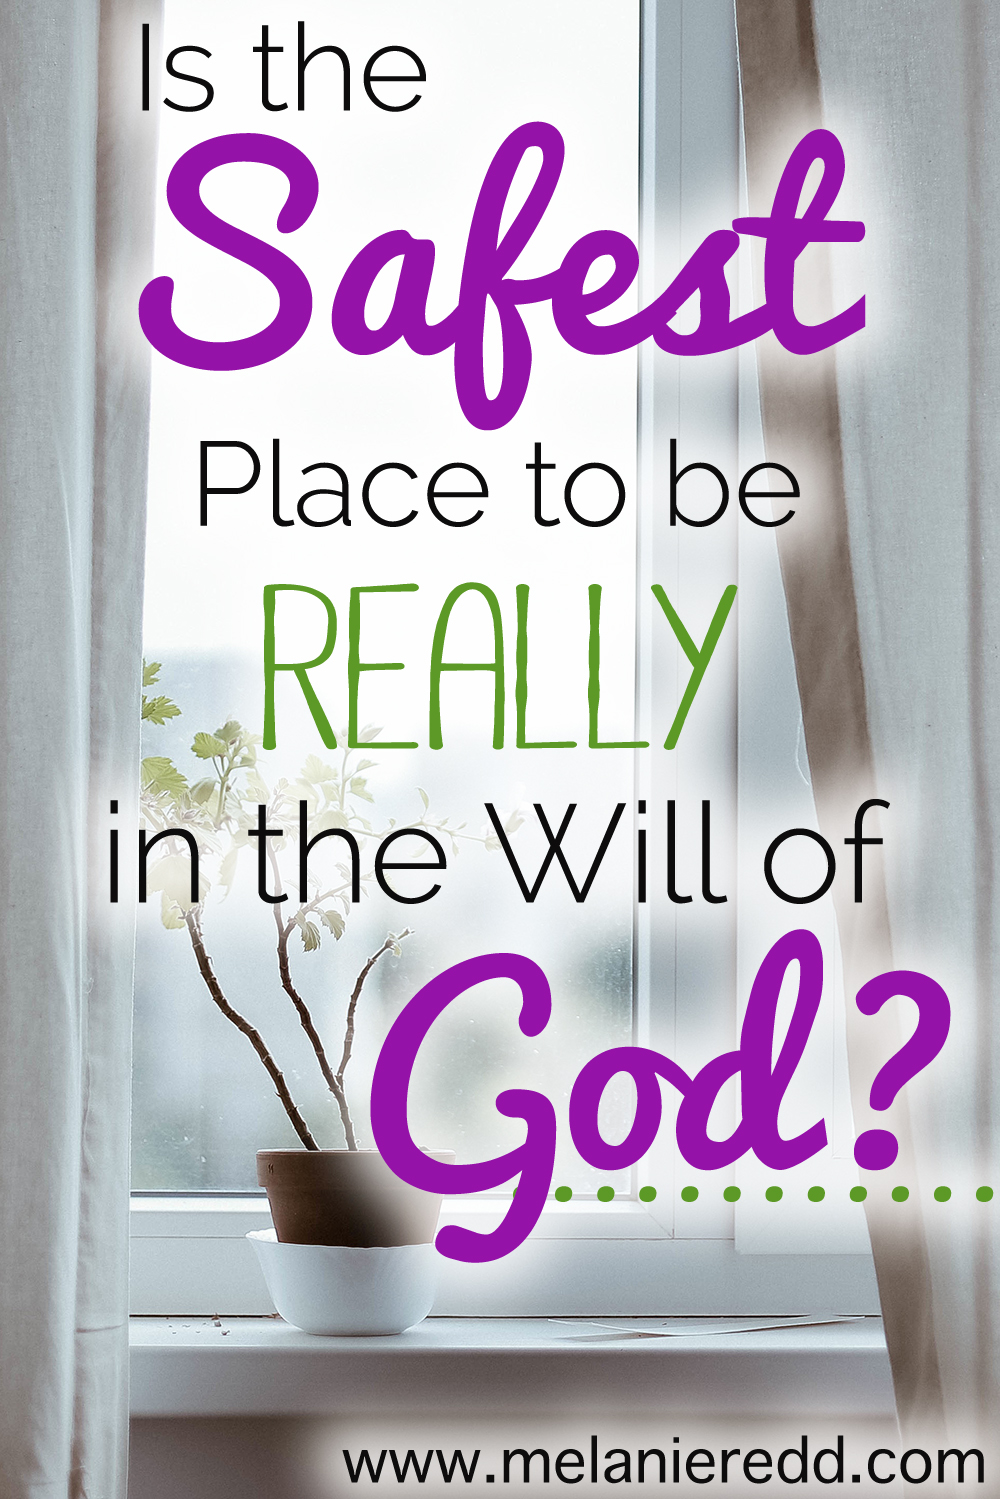 We hear it said often, "The safest place to be is in the will of God." It sounds very comforting and true, but is it biblical? Is it true? That's the trust we are considering today on the blog. Why not stop by for a visit?